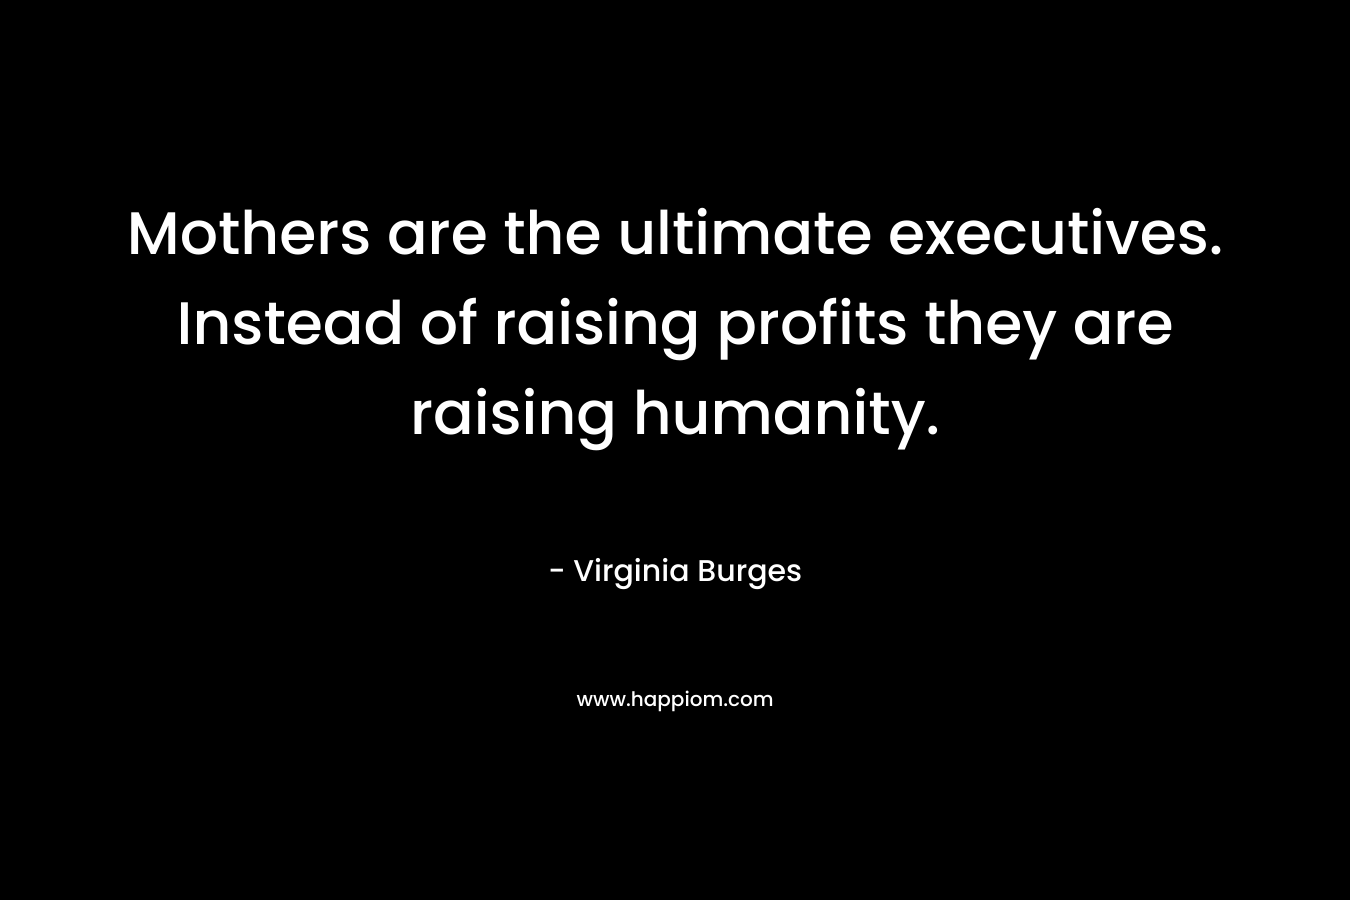 Mothers are the ultimate executives. Instead of raising profits they are raising humanity.